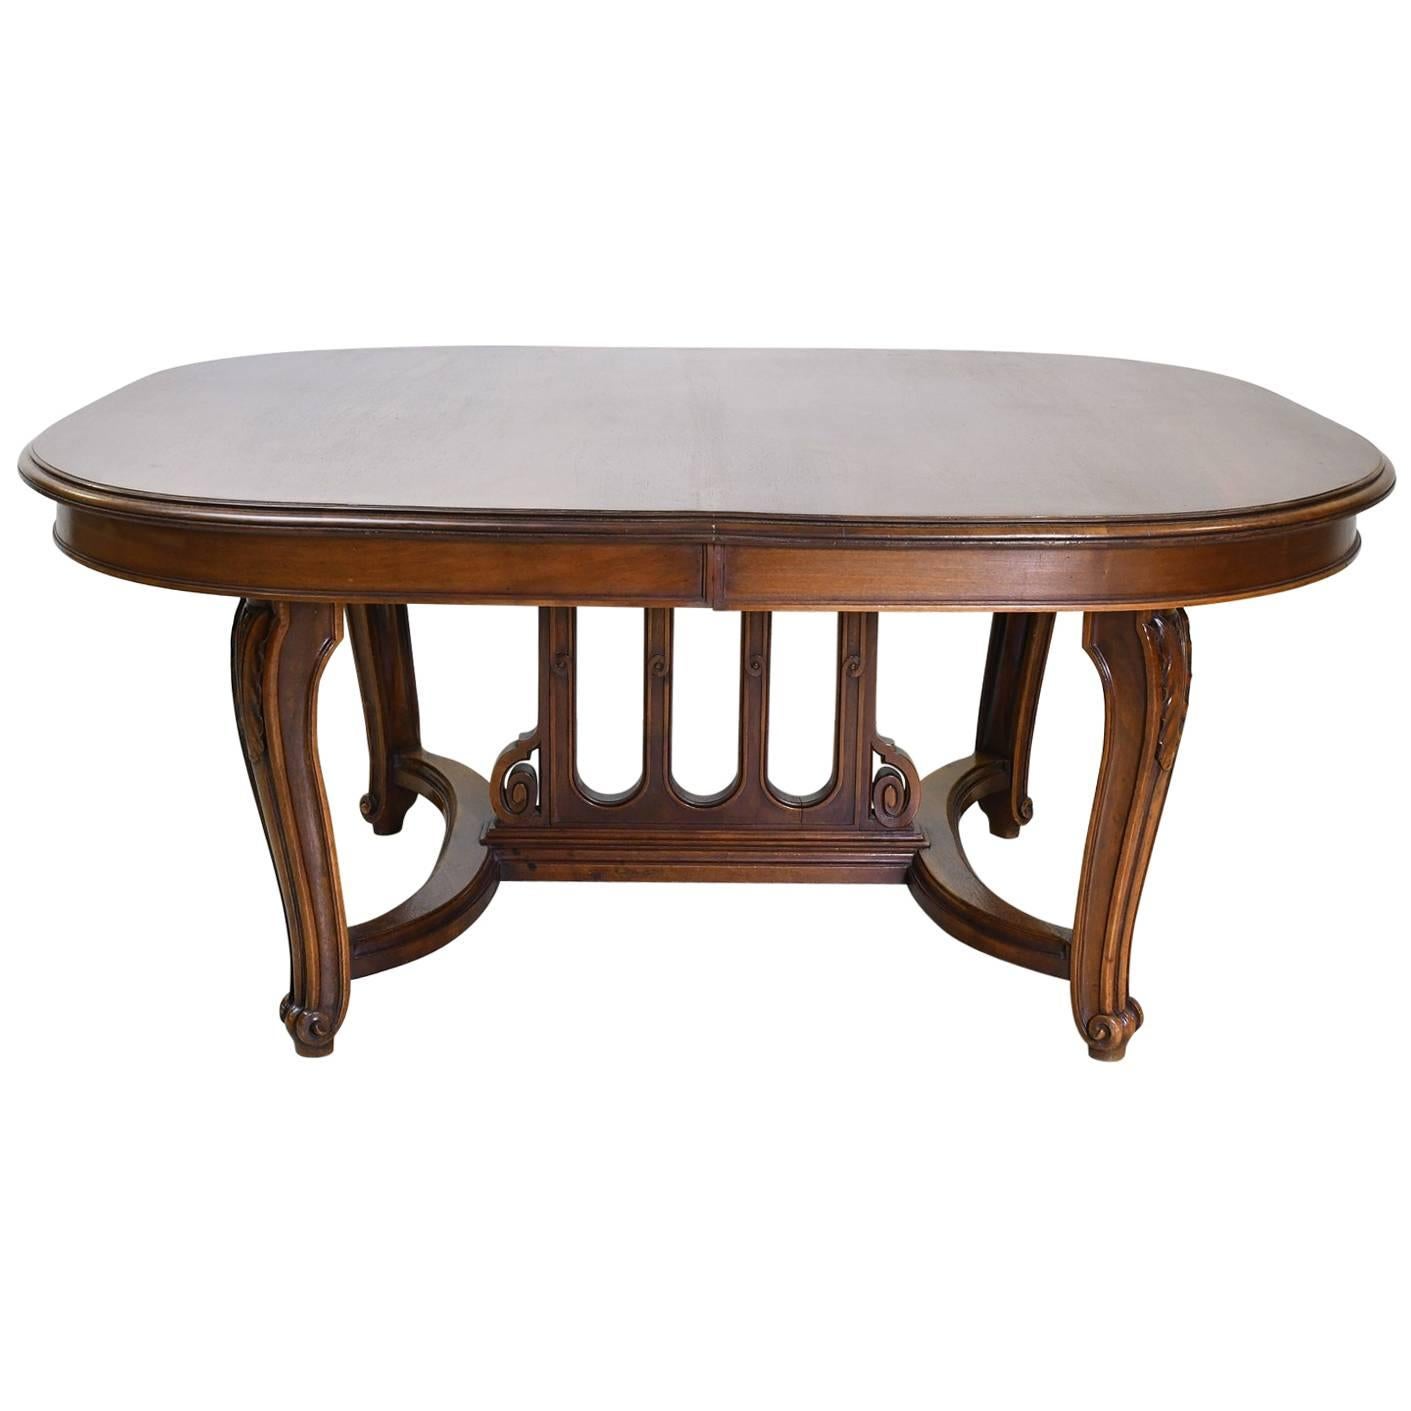 19th Century, French Belle Époque Coffee Table in Walnut